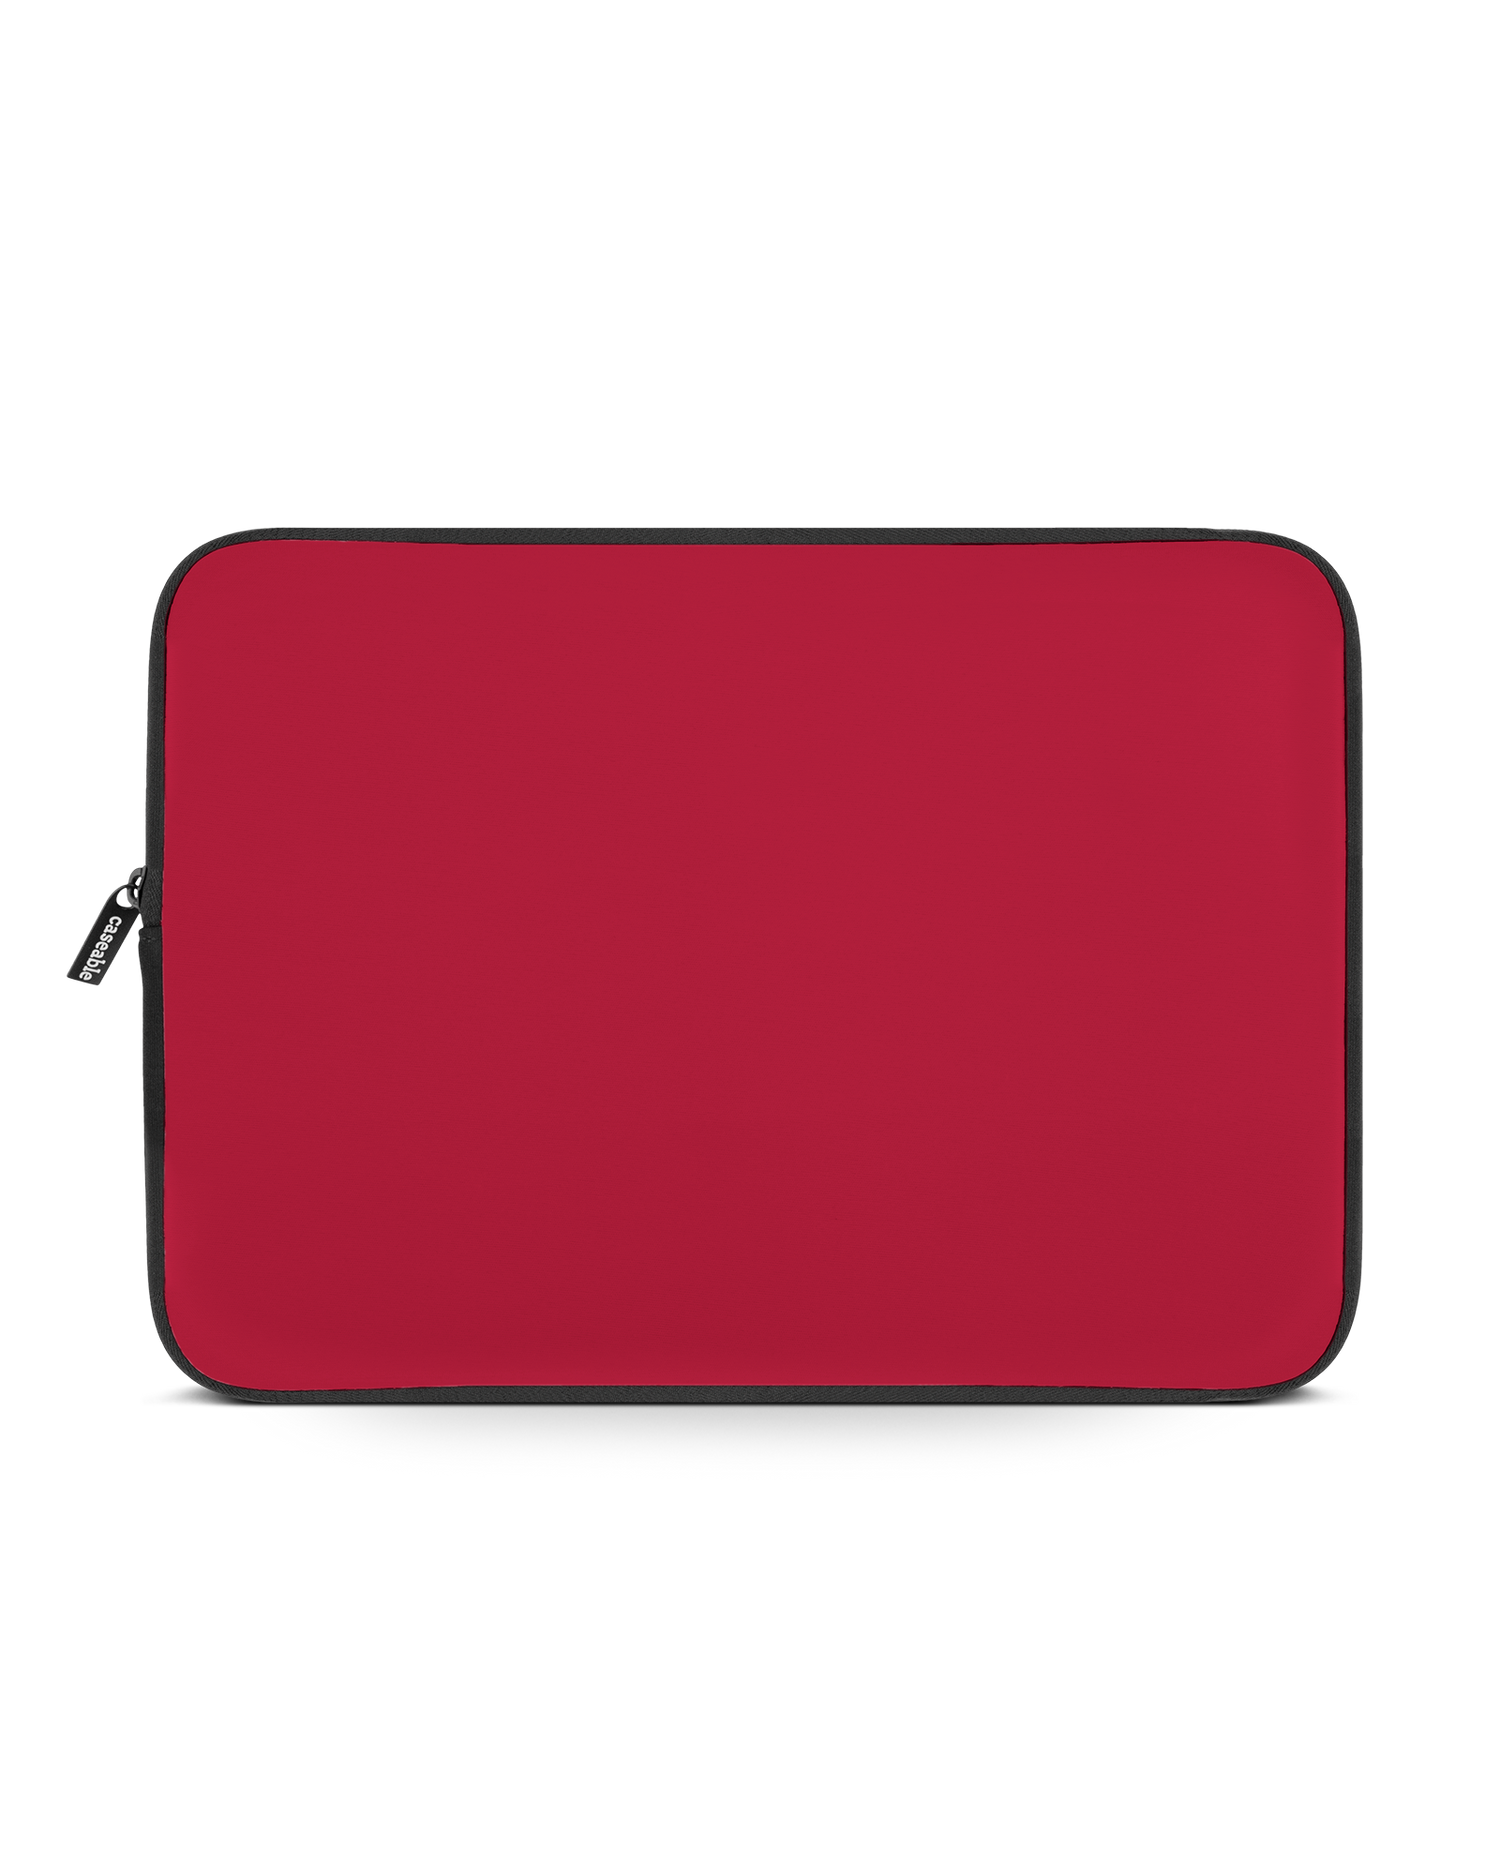 RED Laptop Case 14-15 inch: Front View